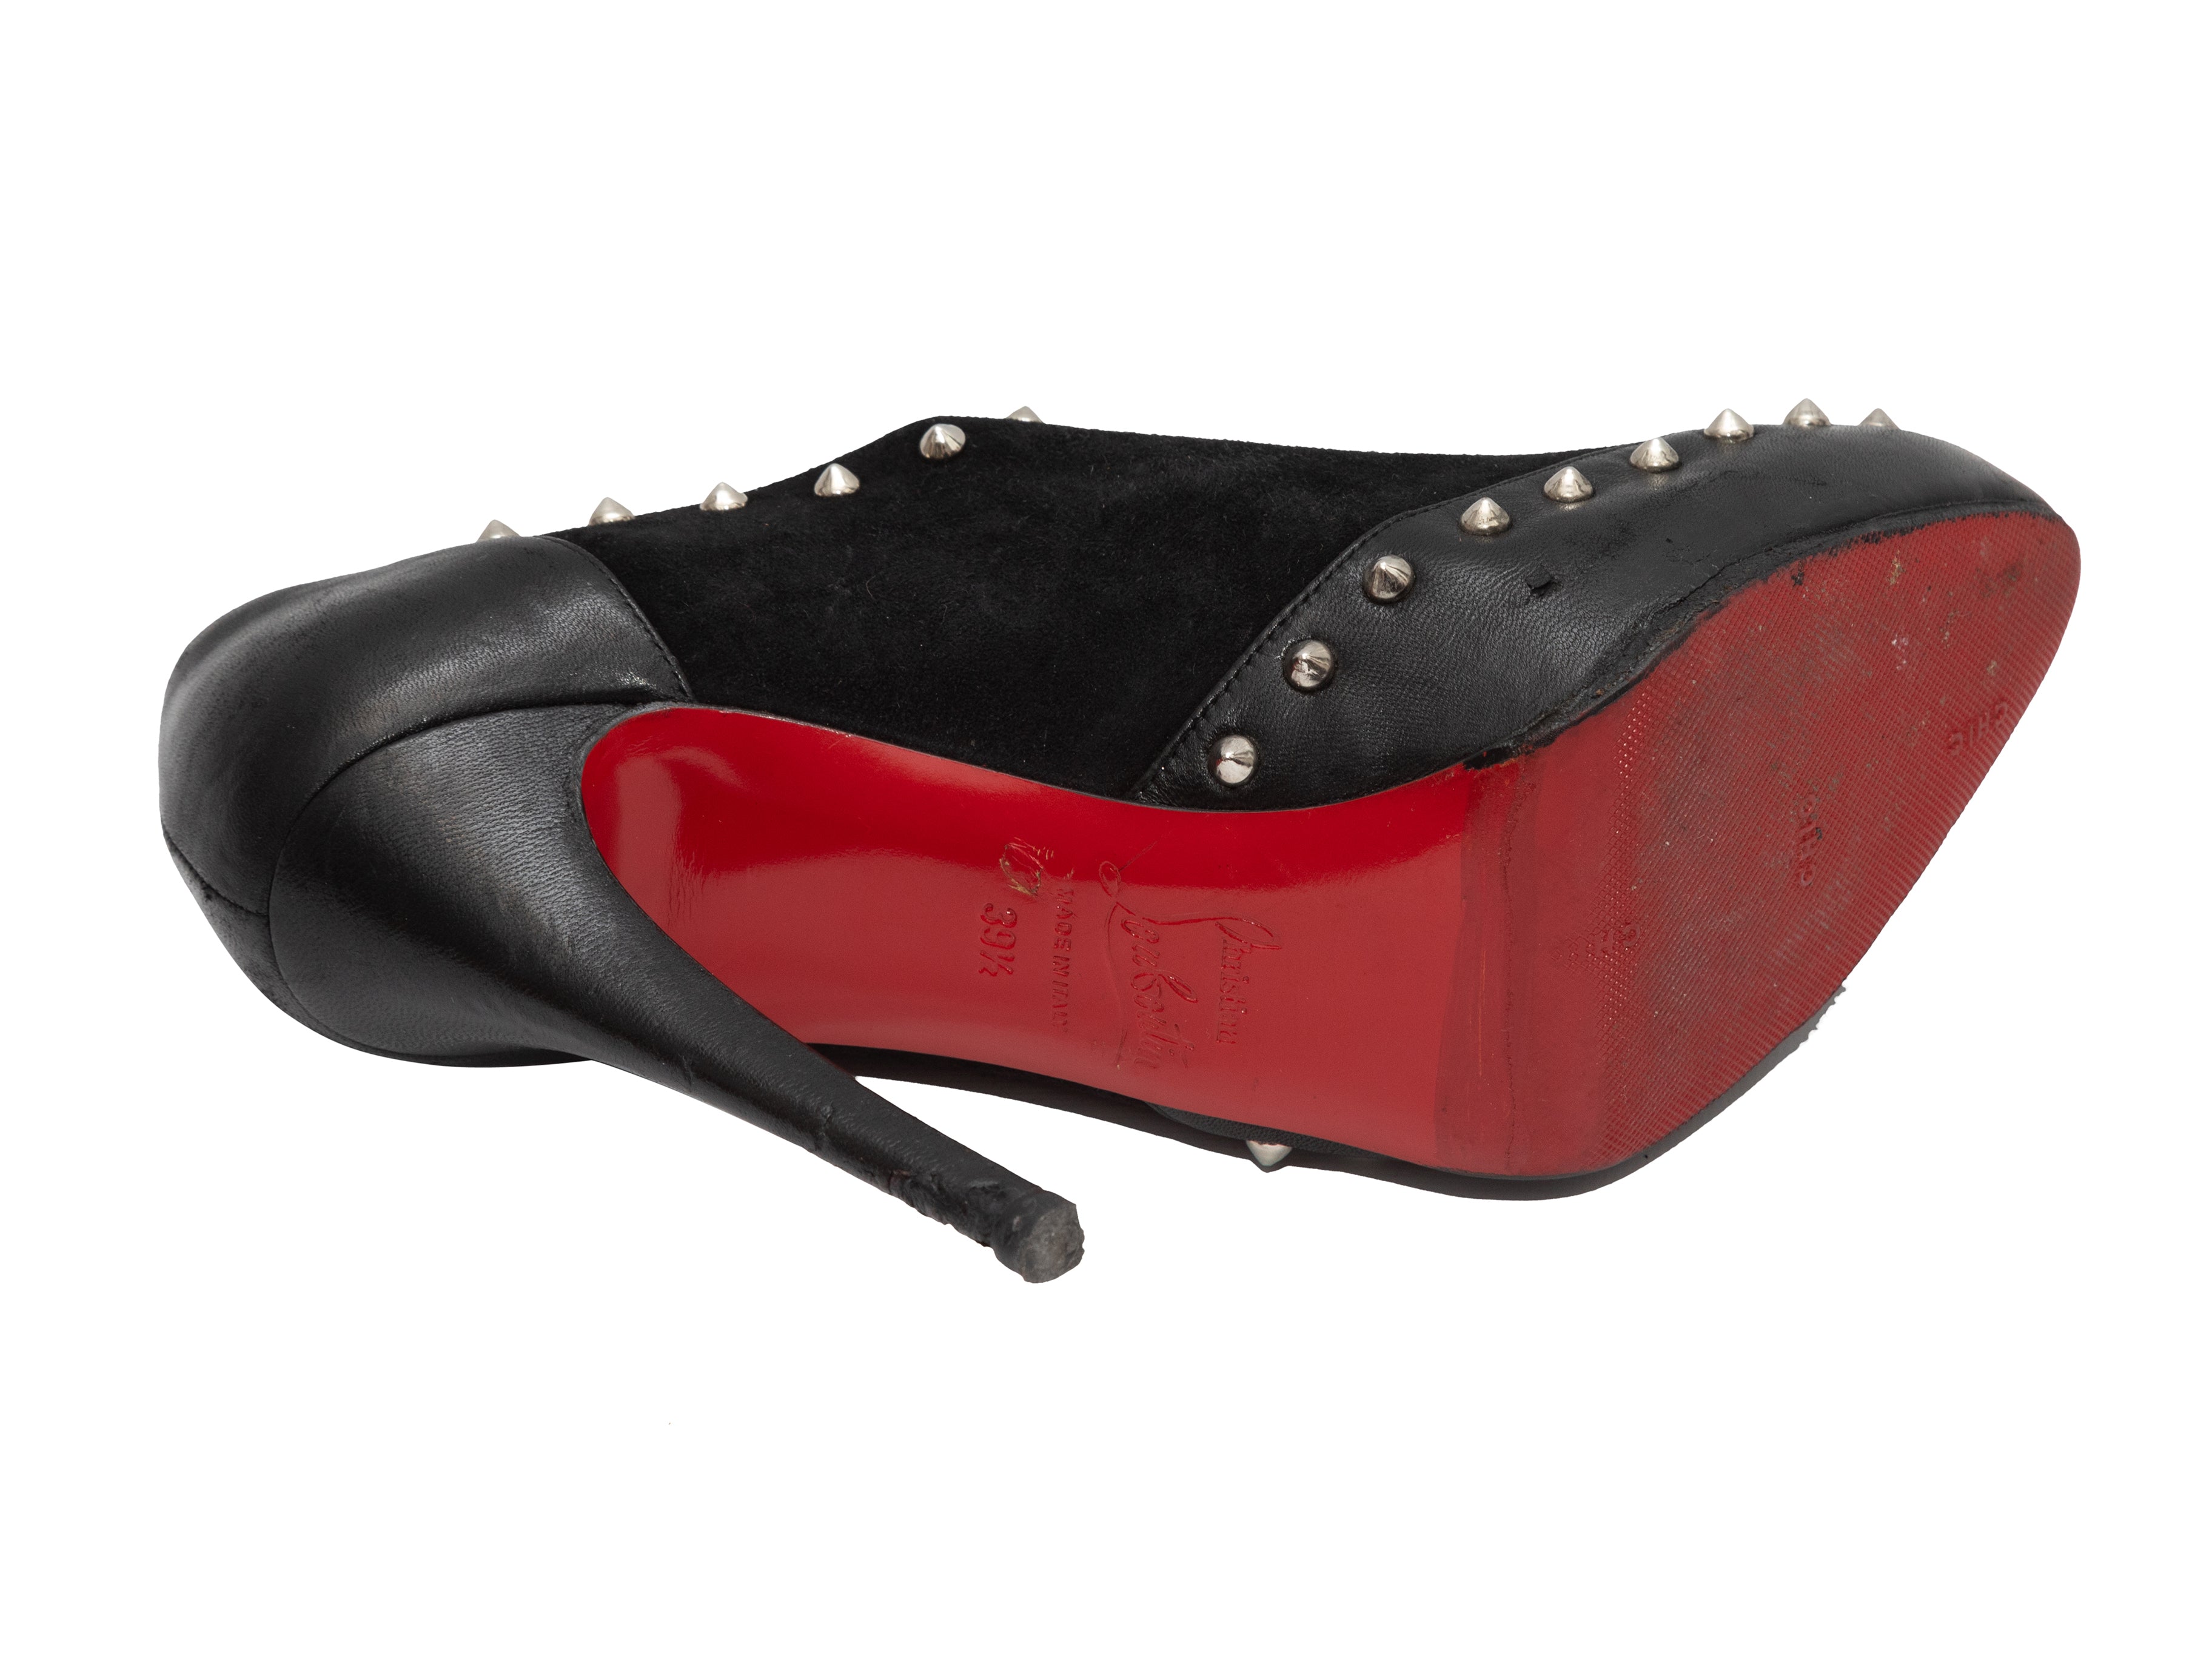 Christian Louboutin Anjalina Studded Patent Leather Pumps in Black | Lyst UK